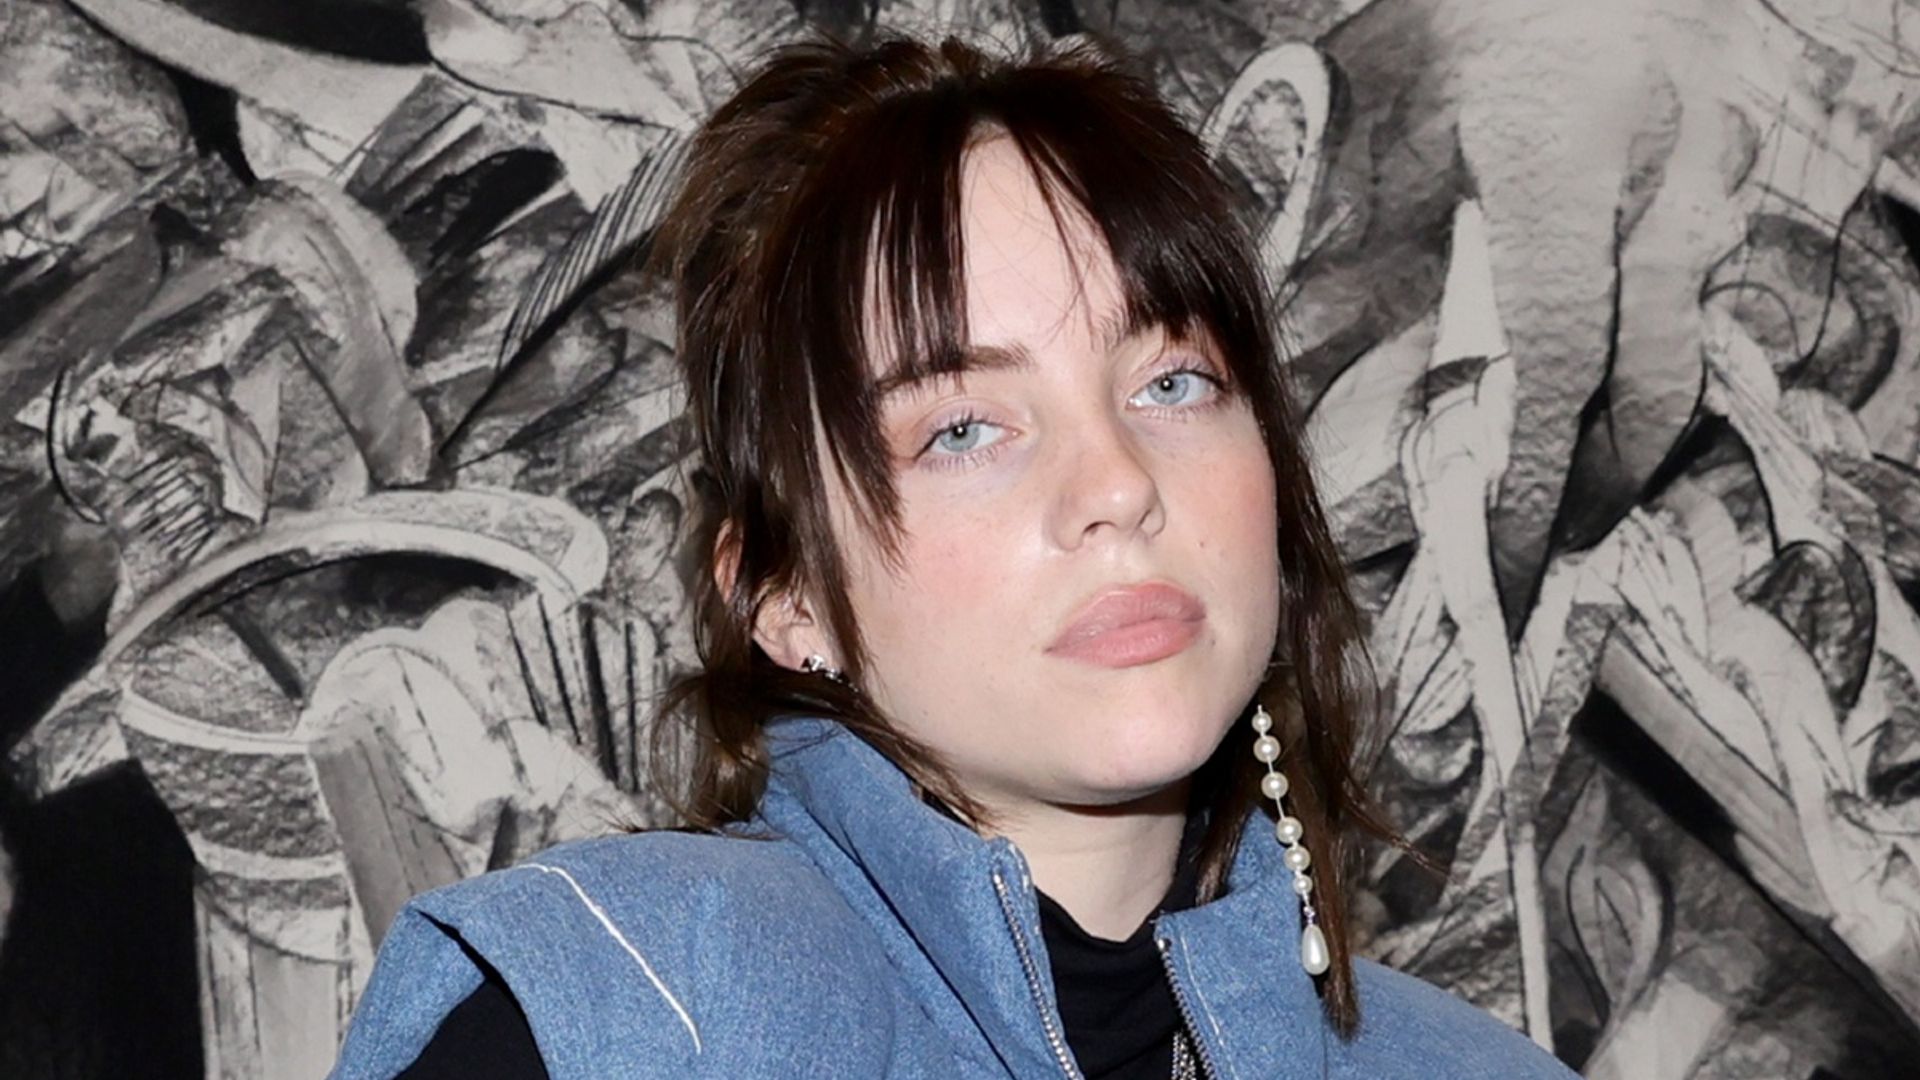 Billie Eilish channels Silence of the Lambs for haunting new photograph